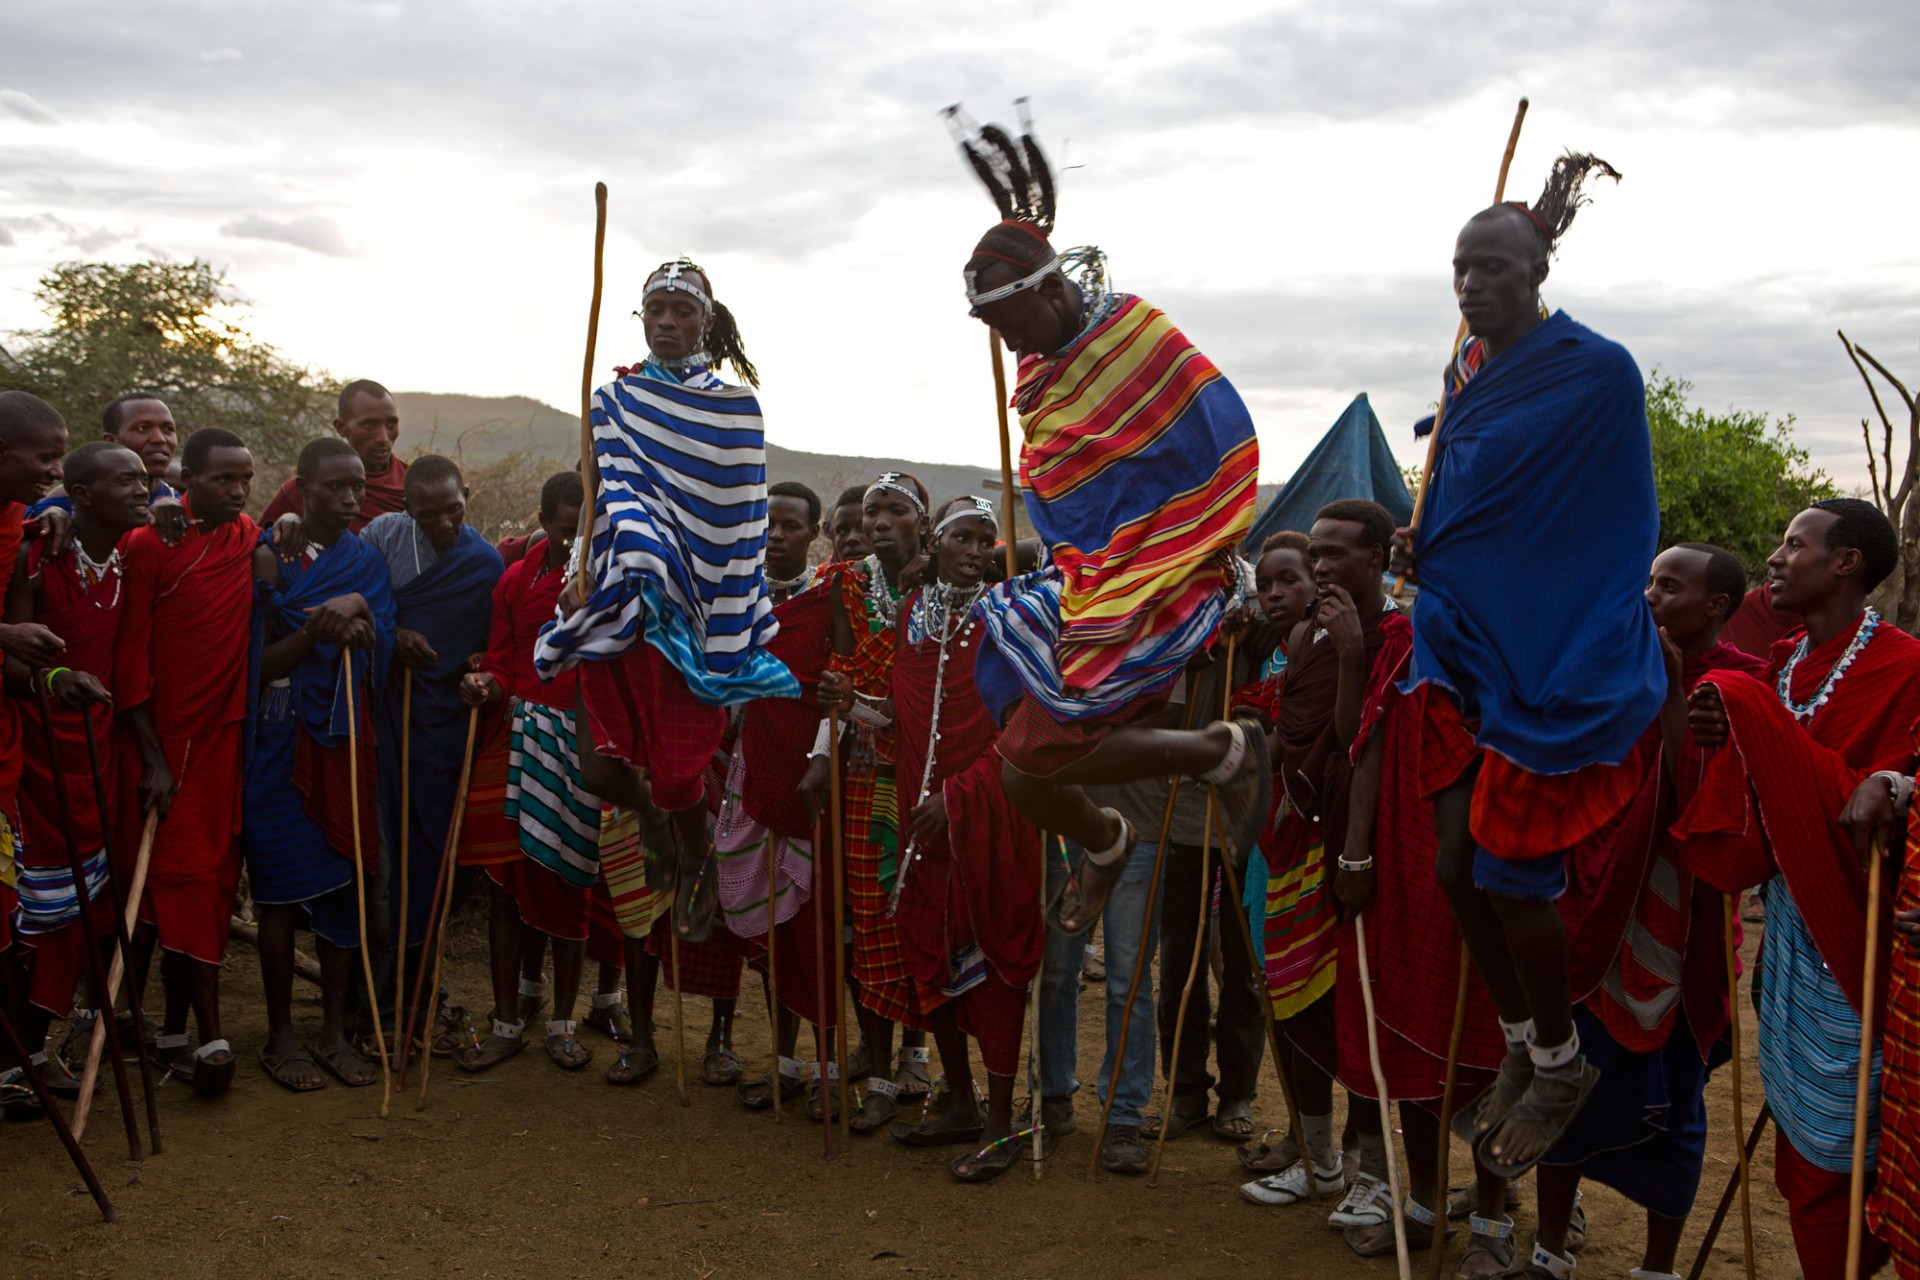 From the everyday life of the Maasai in Tanzania